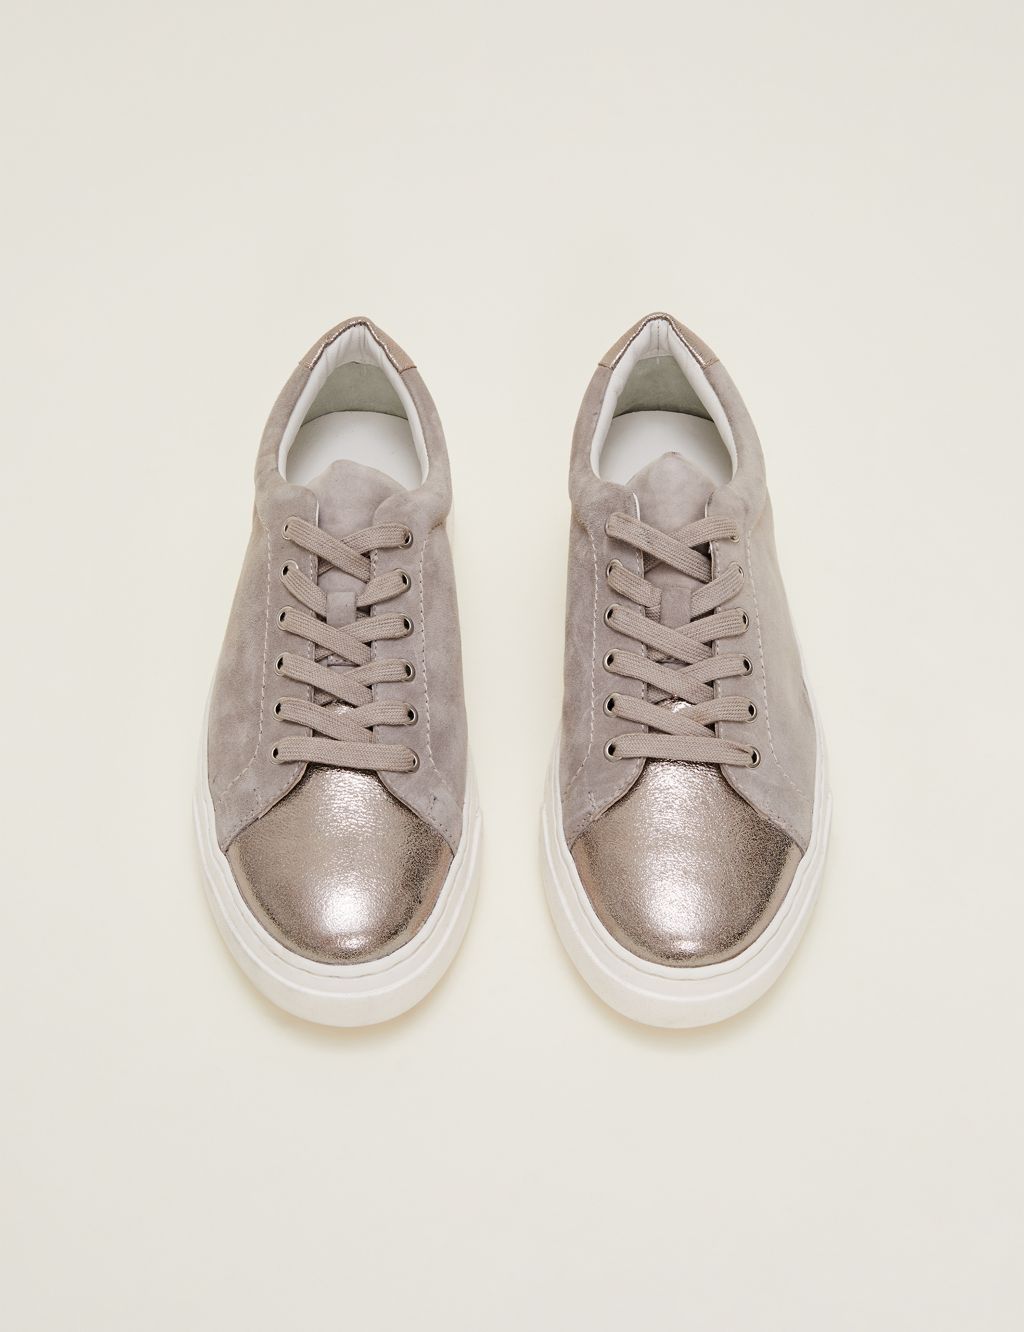 Leather Suede Lace Up Metallic Trainers image 3